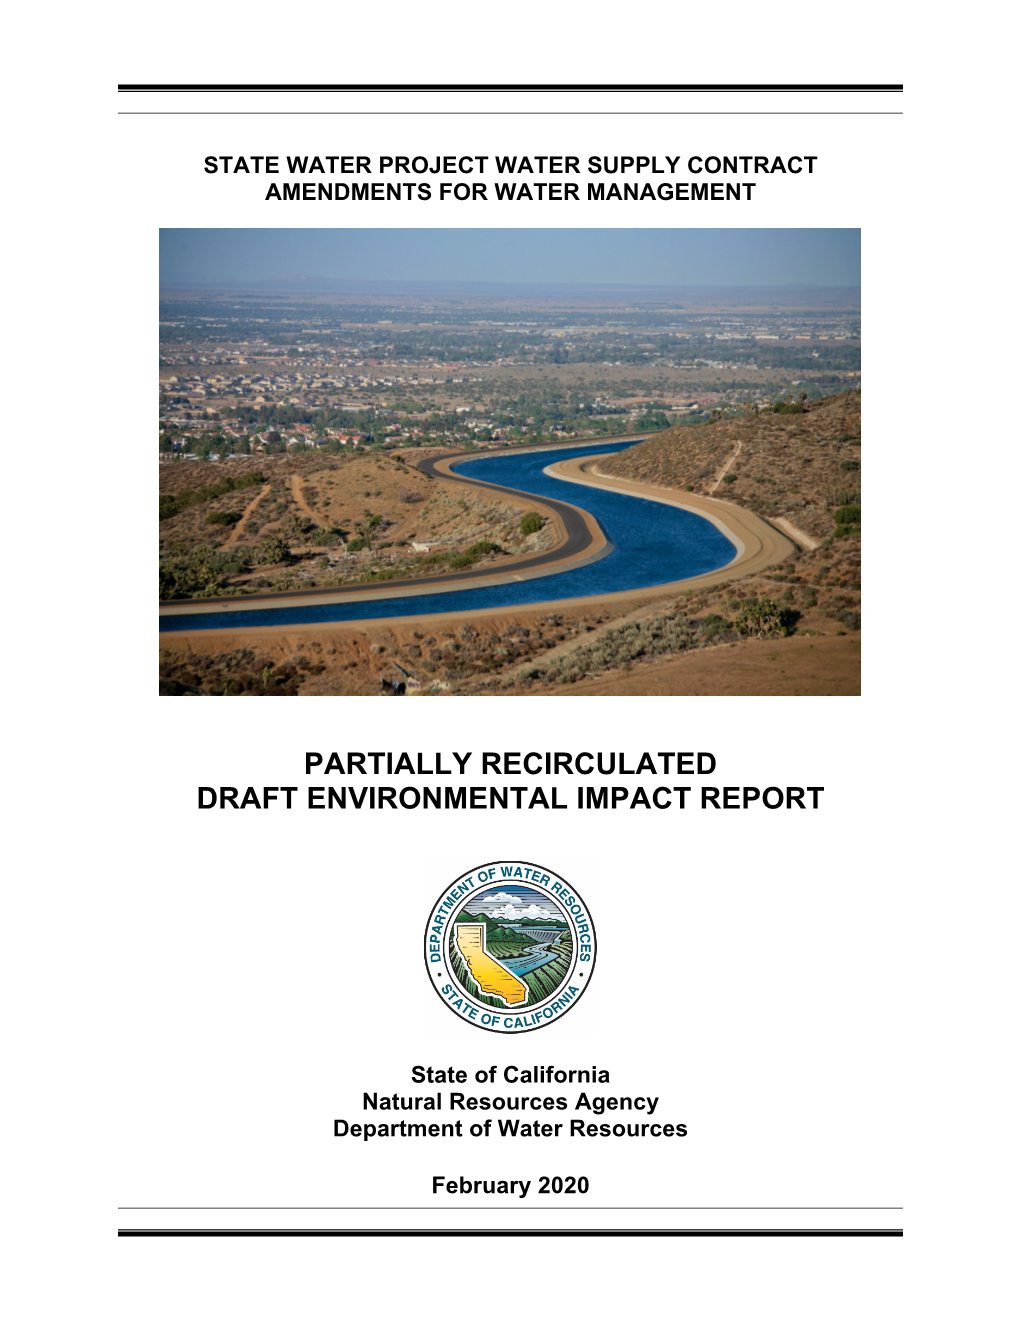 SWP) Water Supply Contract Amendments for Water Management (Proposed Project Or Proposed Amendment